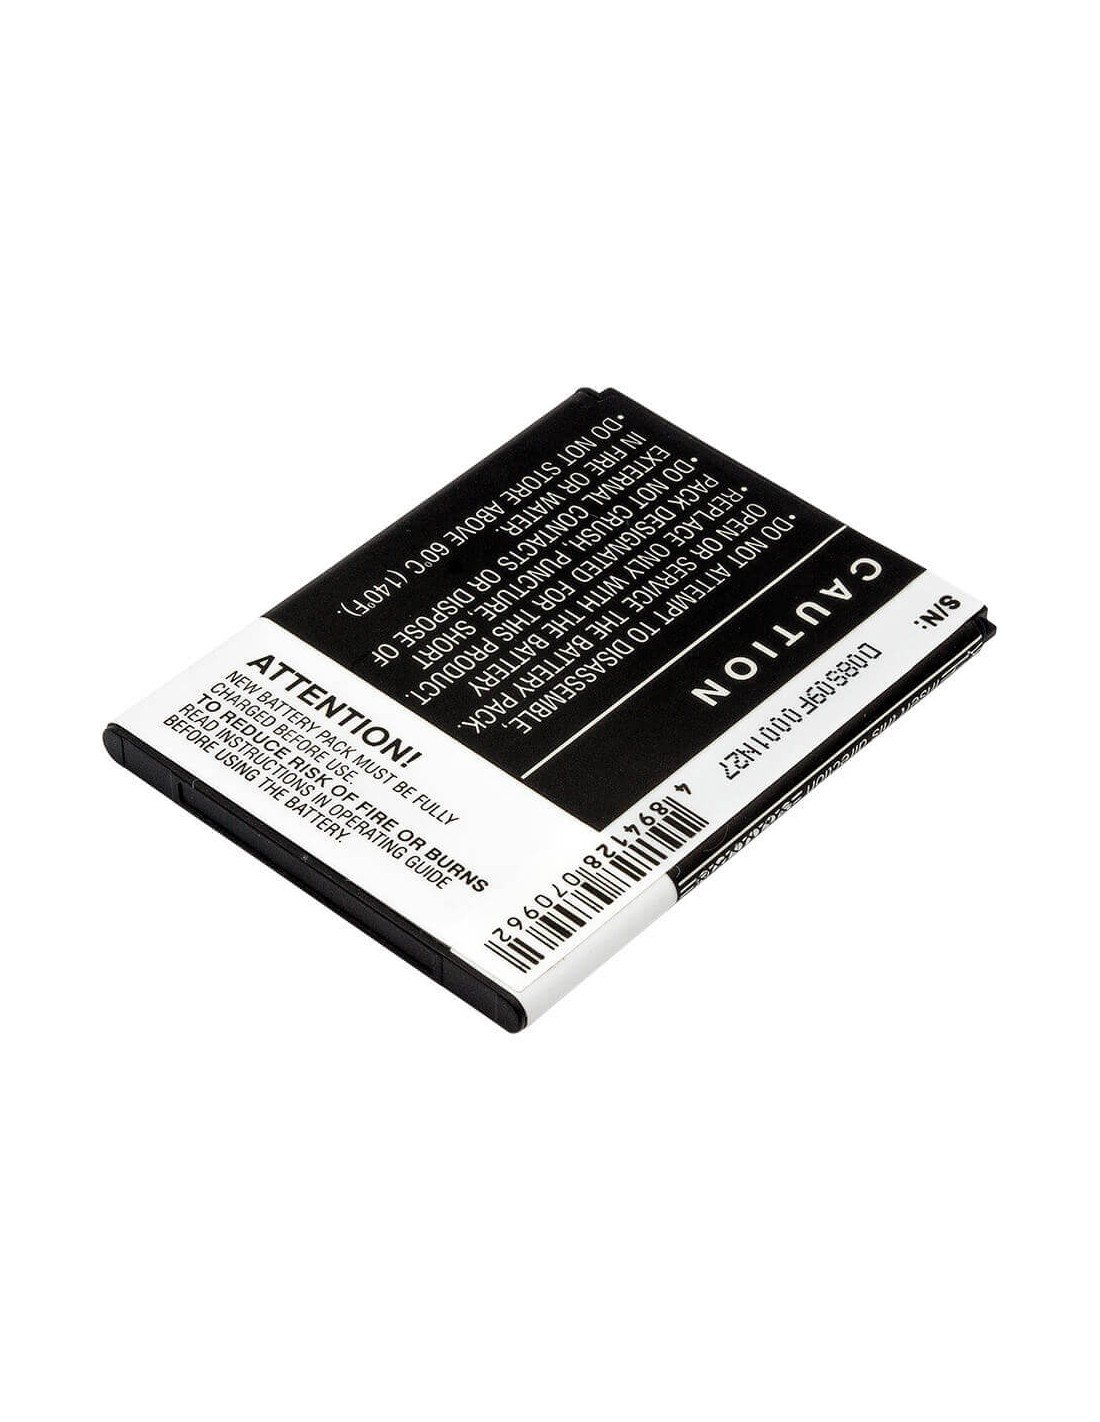 Battery for Alcatel One Touch Shockwave, ADR3045 3.7V, 1450mAh - 5.37Wh